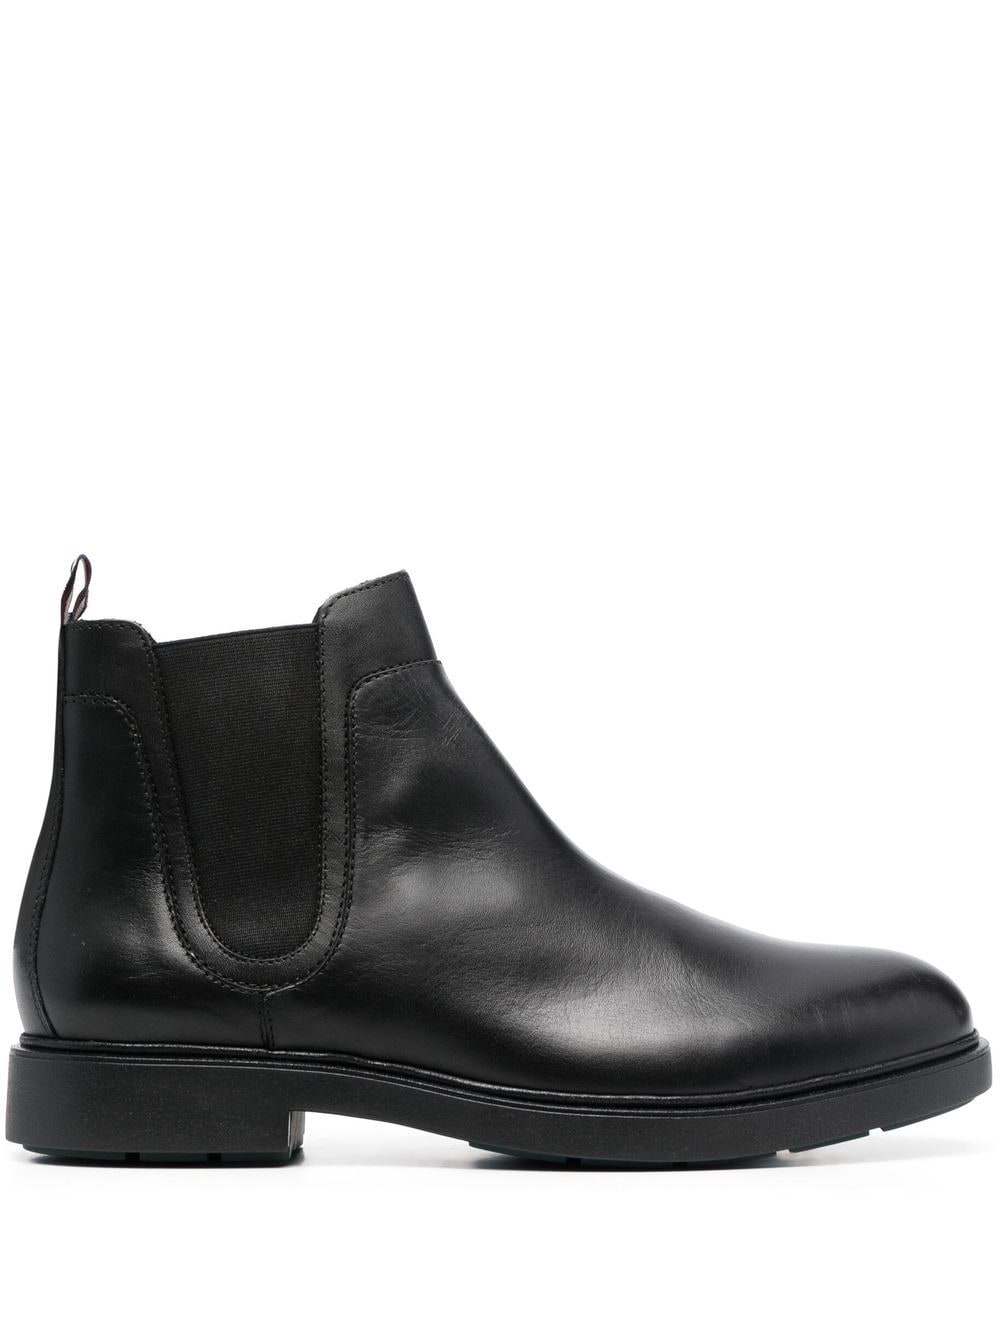 Tommy Hilfiger Rounded Chelsea Booties - Black von Tommy Hilfiger